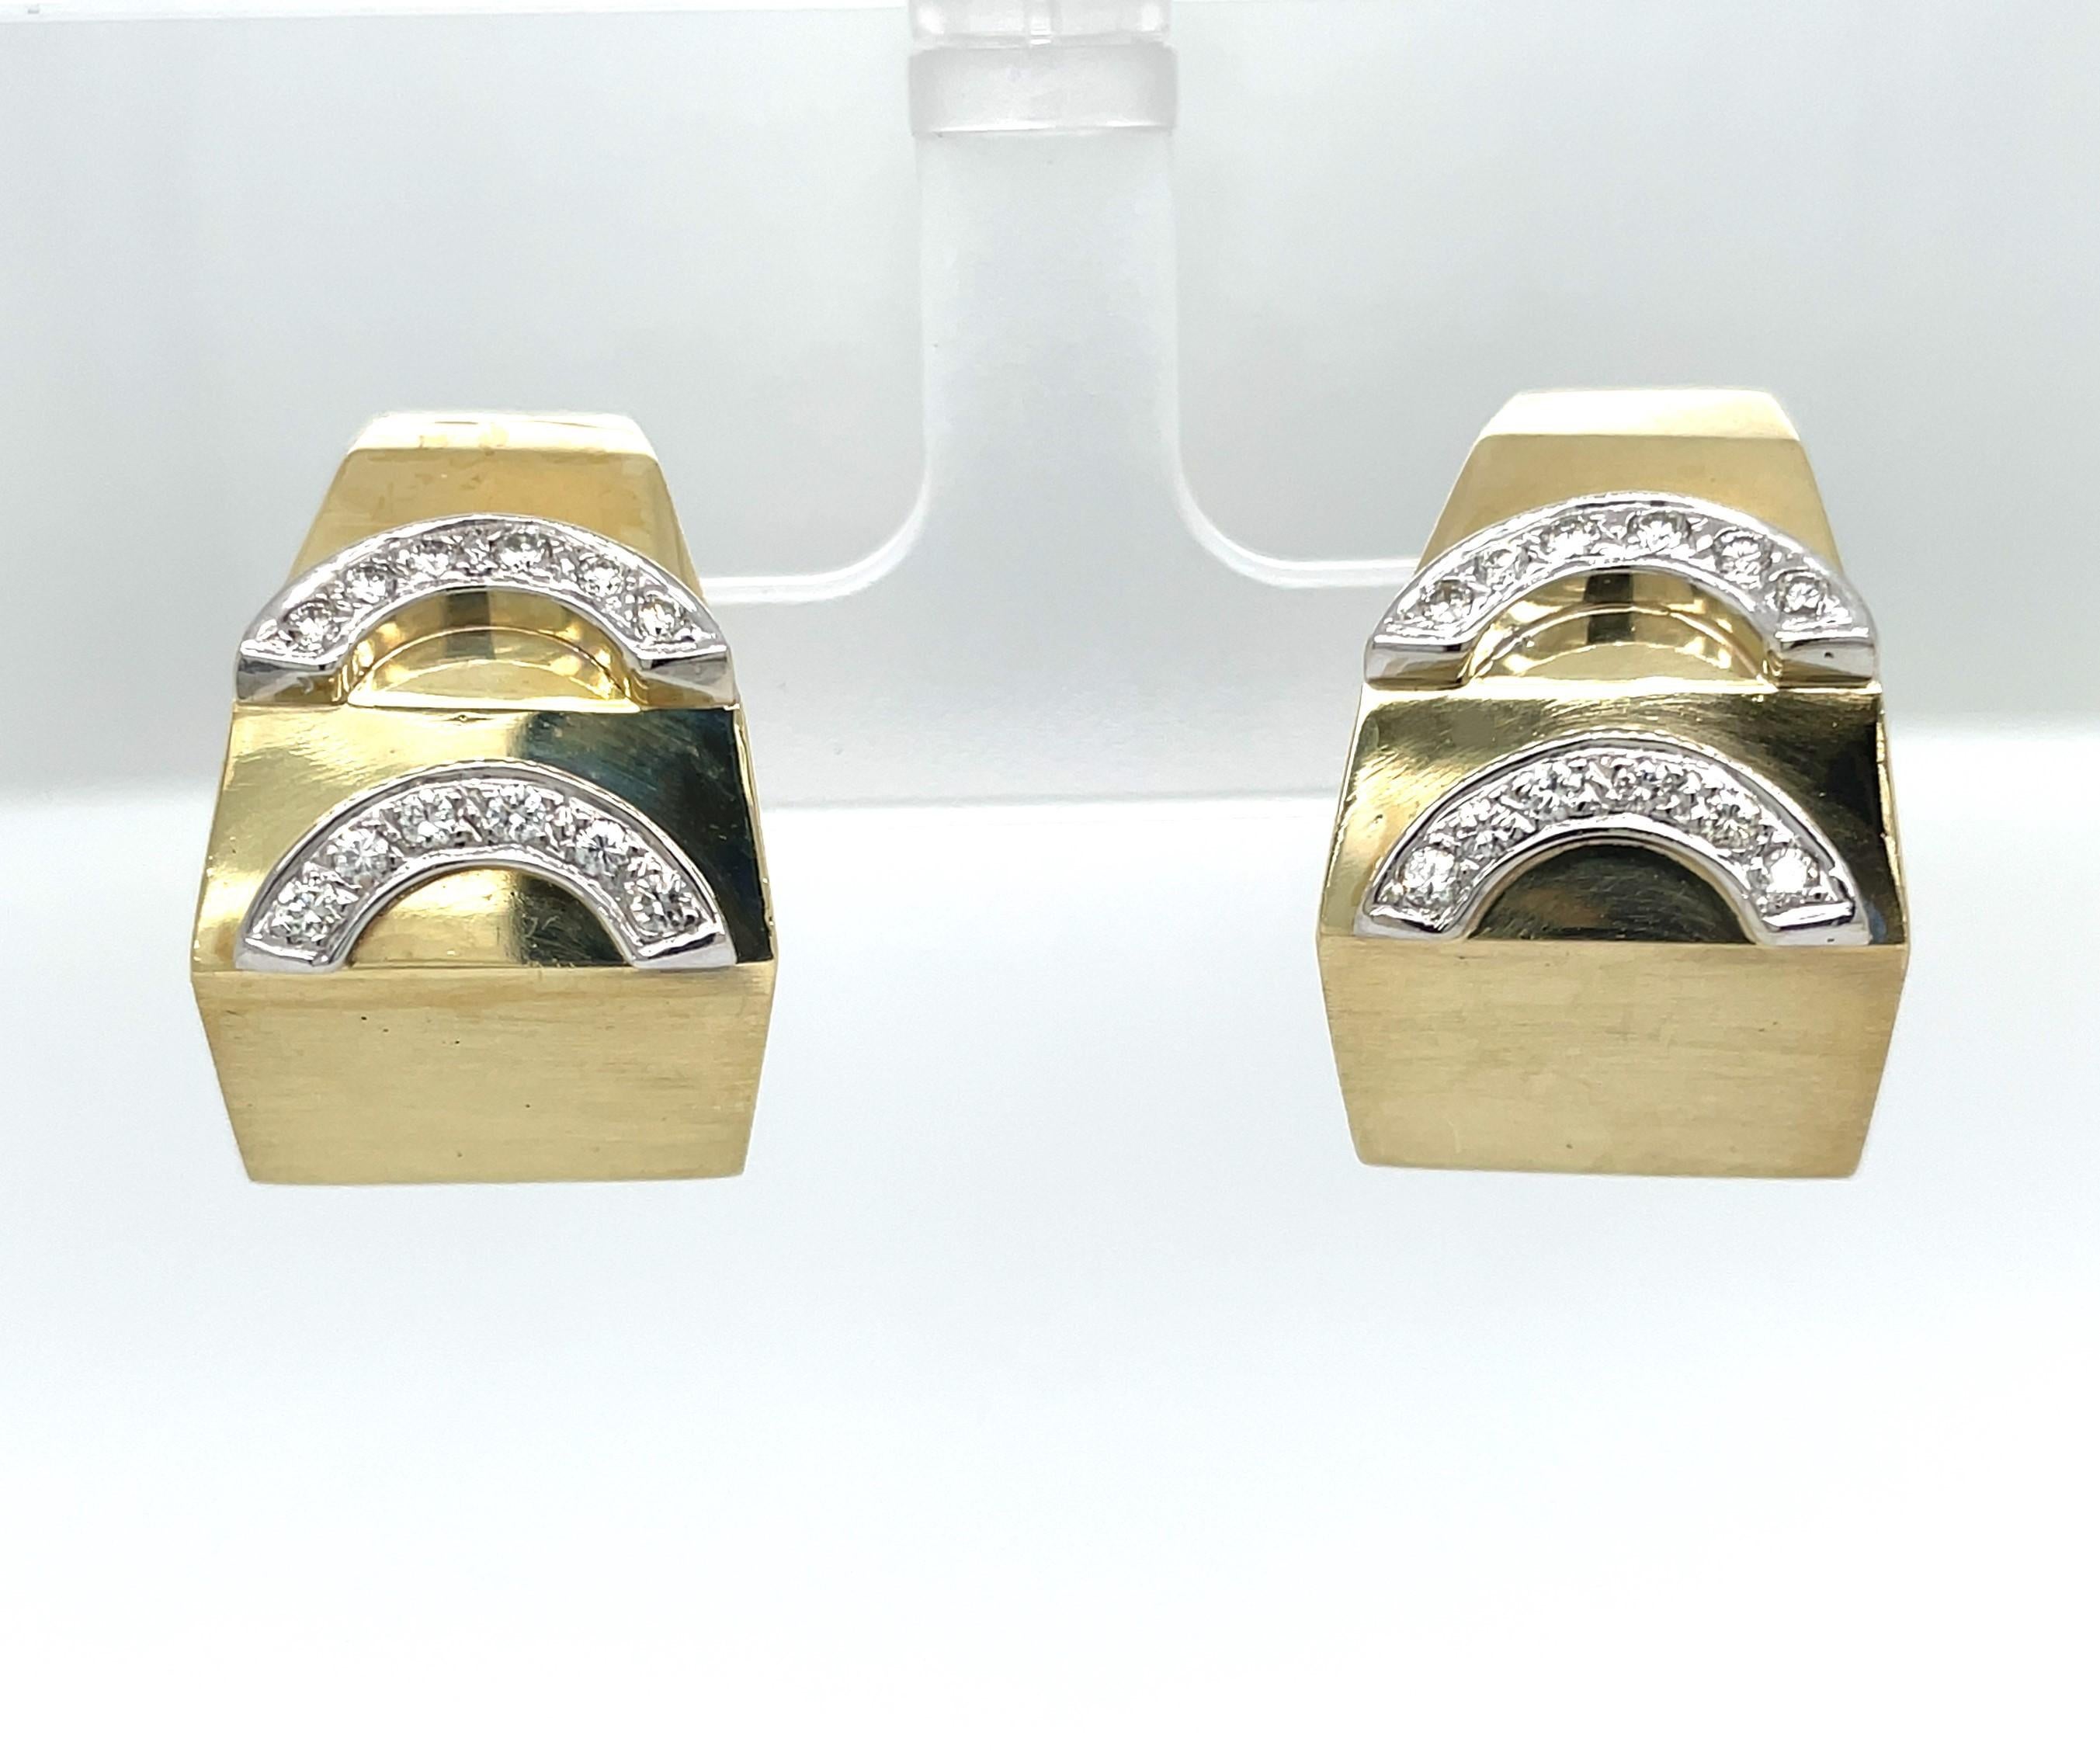 Uniquely geometric as a flat-side wide angled hoop earring pair this bold design also has a  pyramid-like shape gradating from 3/8 in to 1/2 inch to 5/8 all created in satin 14 karat yellow gold. Diamond appliques are channel-set in gold forming a